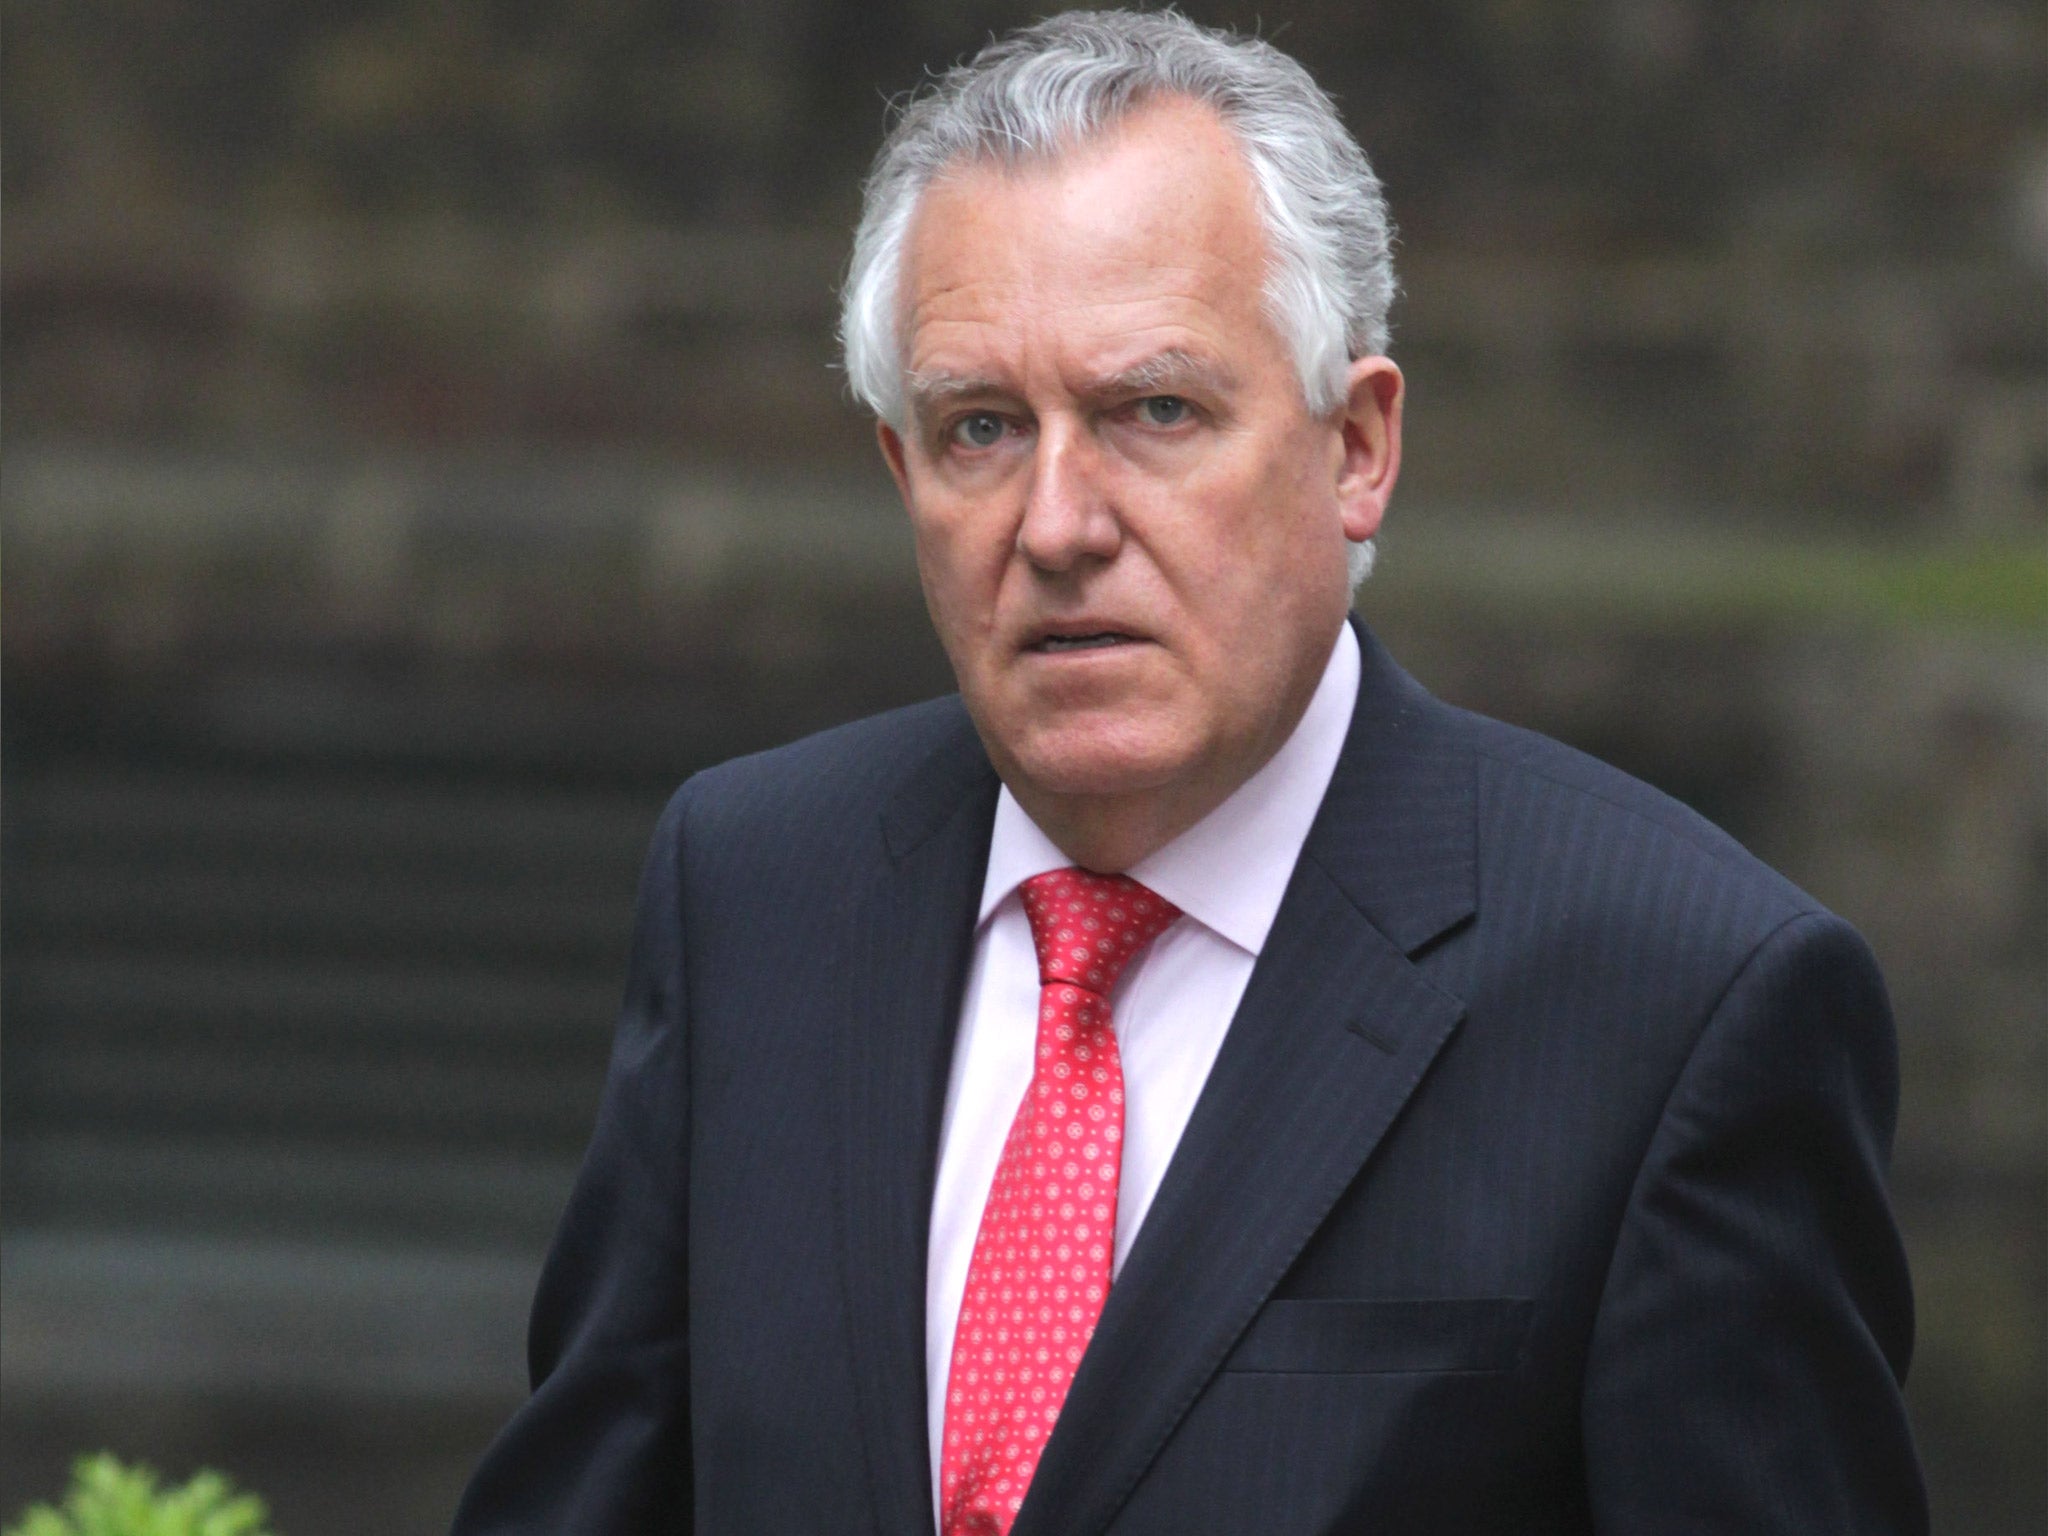 Peter Hain, the former Cabinet Office minister